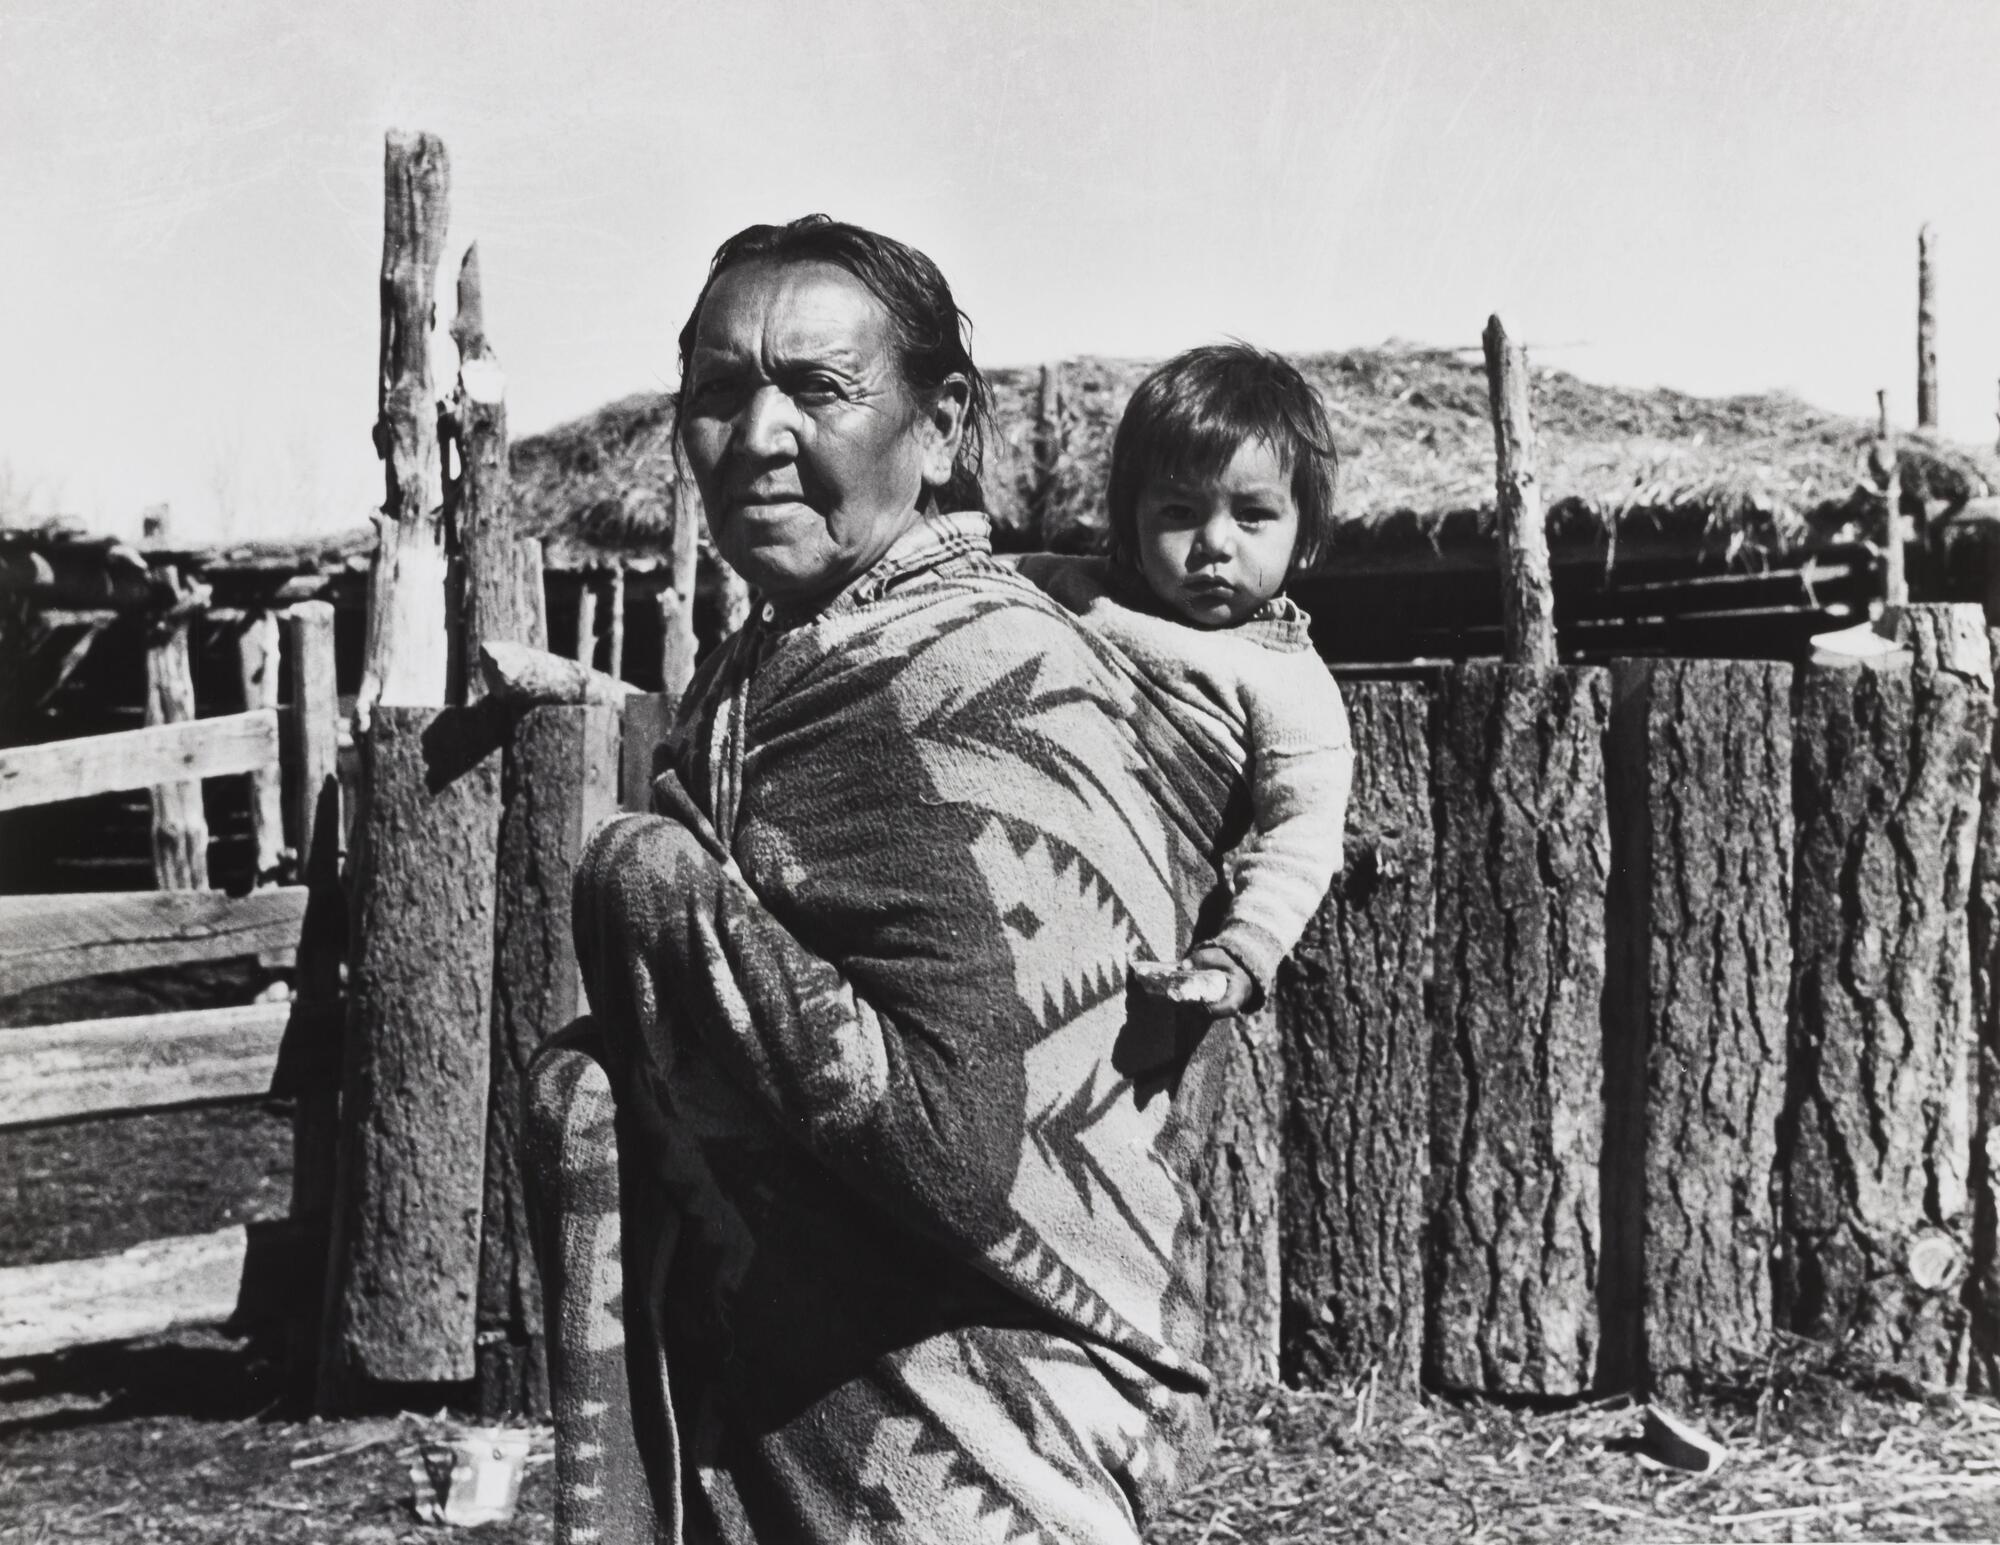 A photograph of an old woman with a baby on her back. She stands in front of a wooden enclosure, fences on the left side of the frame.